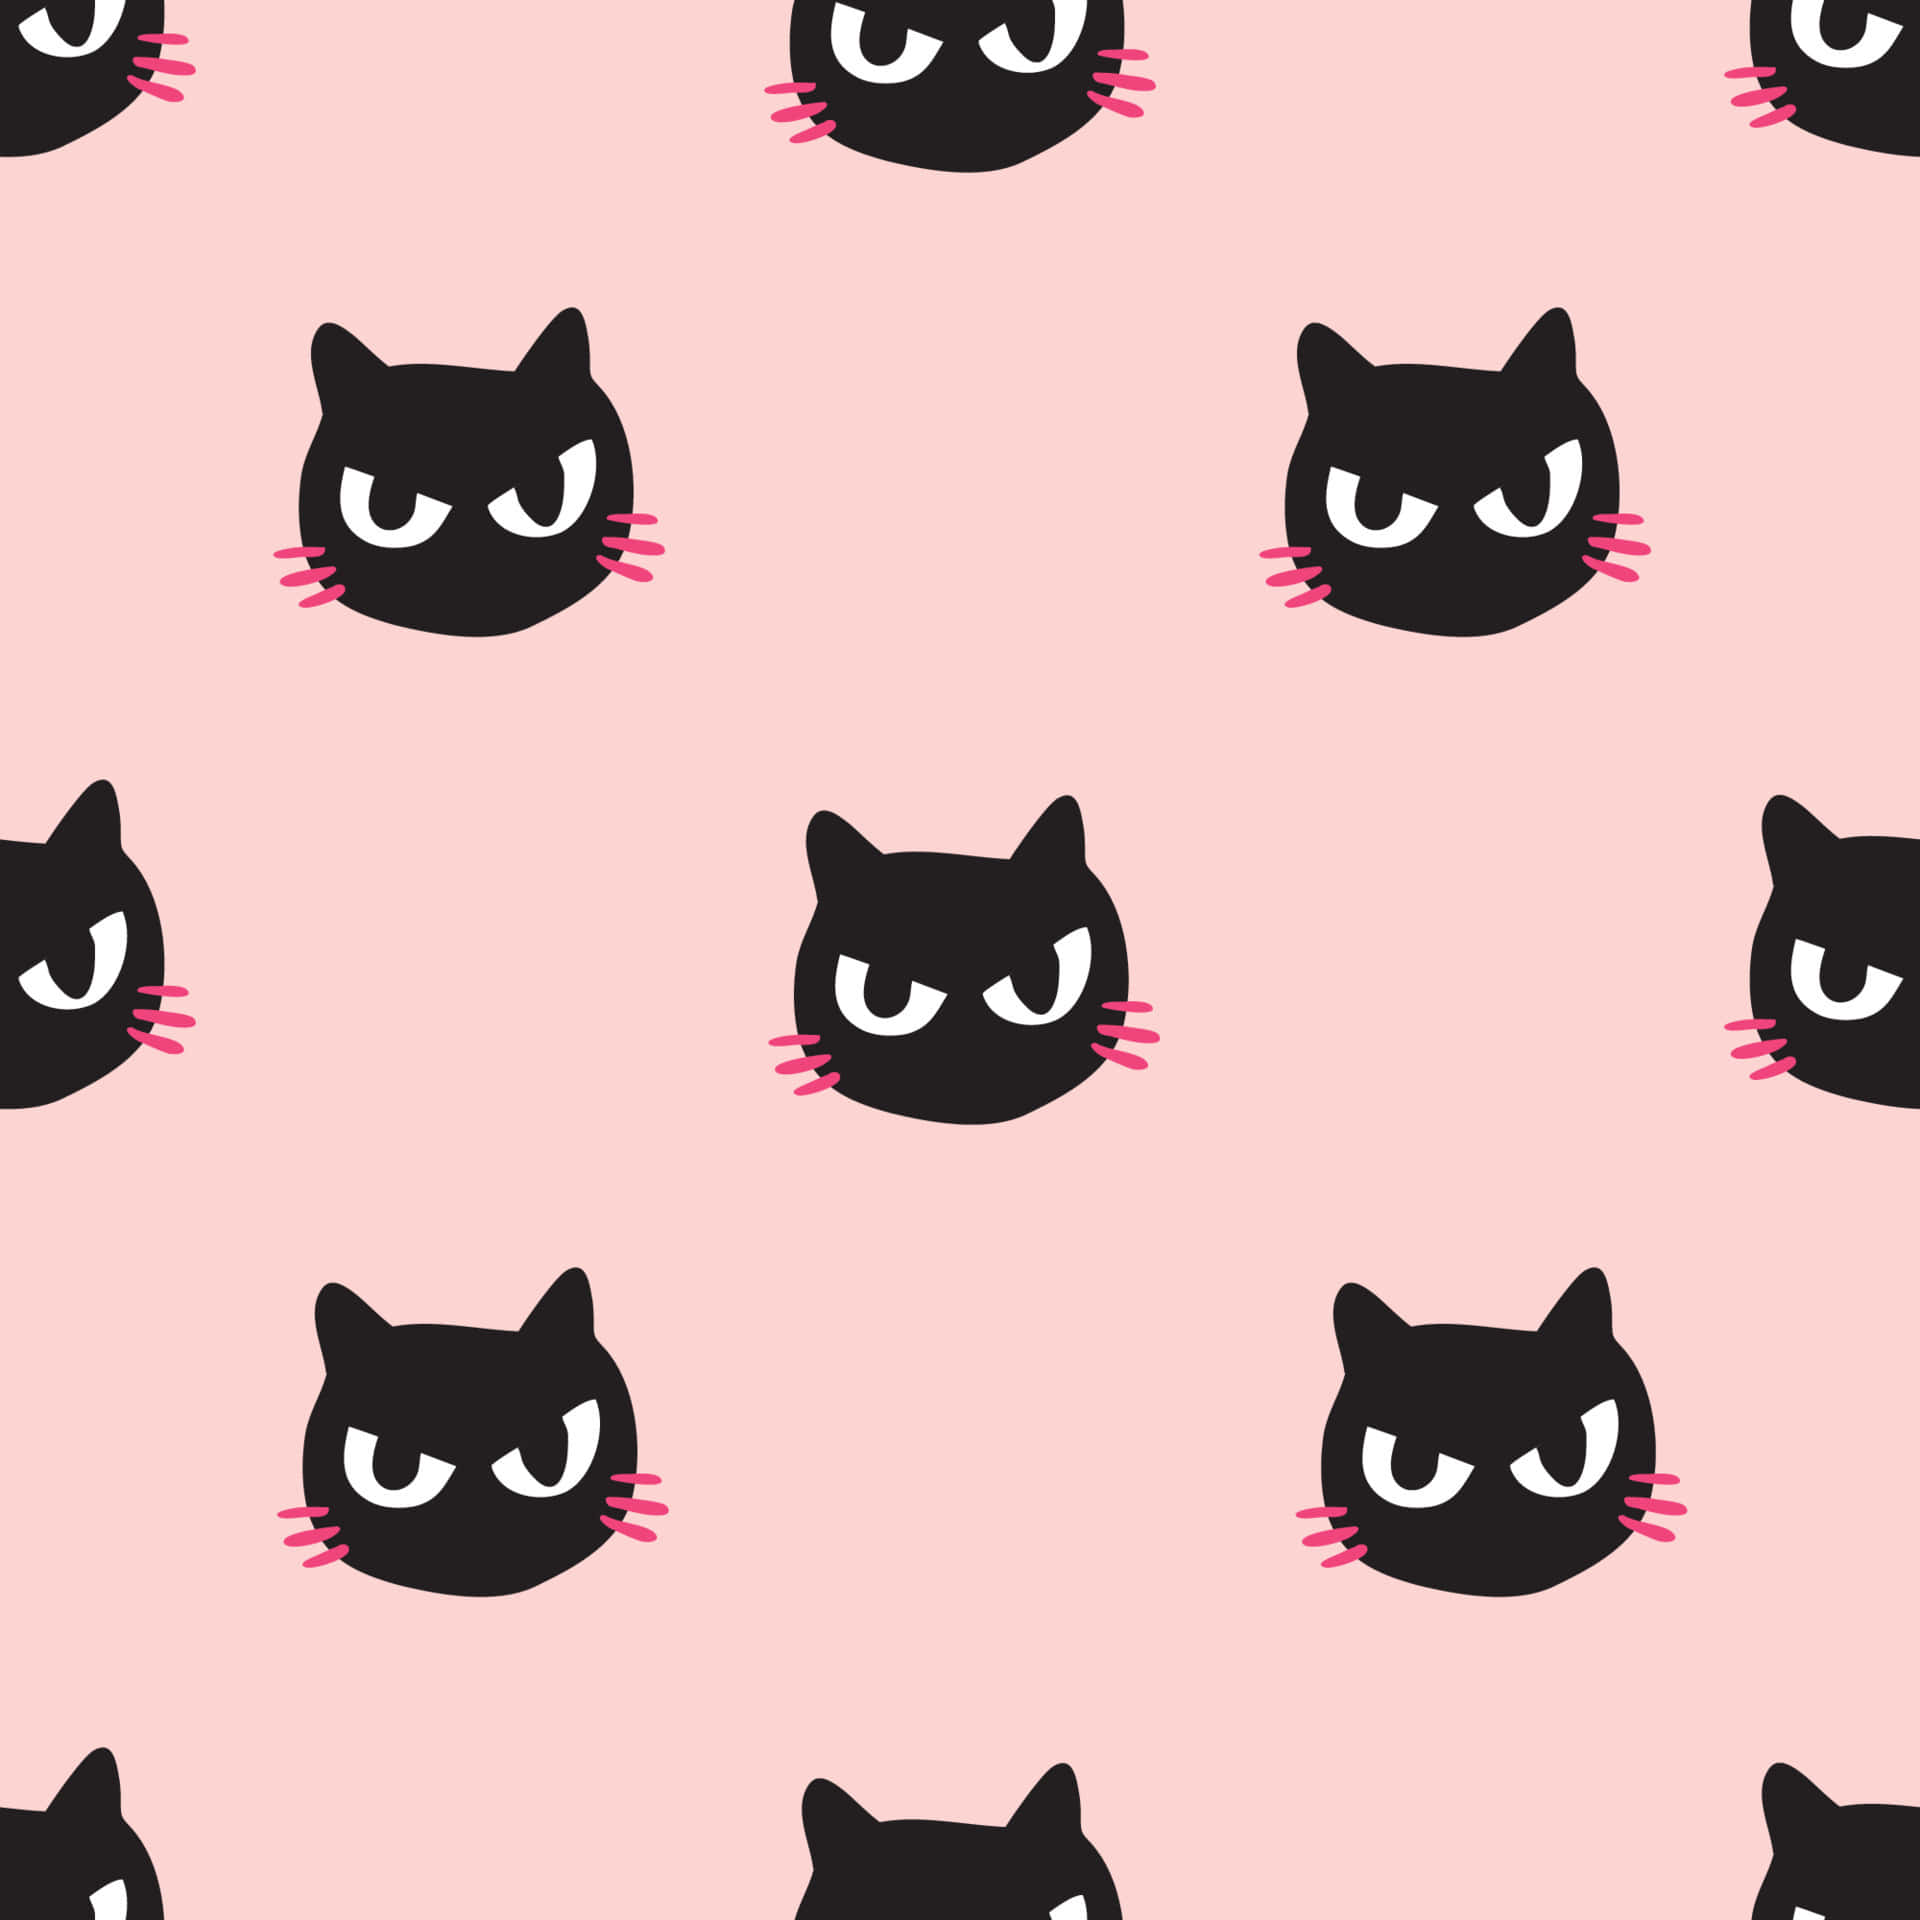 A cute cat pattern wallpaper to add a touch of feline cheer to your home Wallpaper